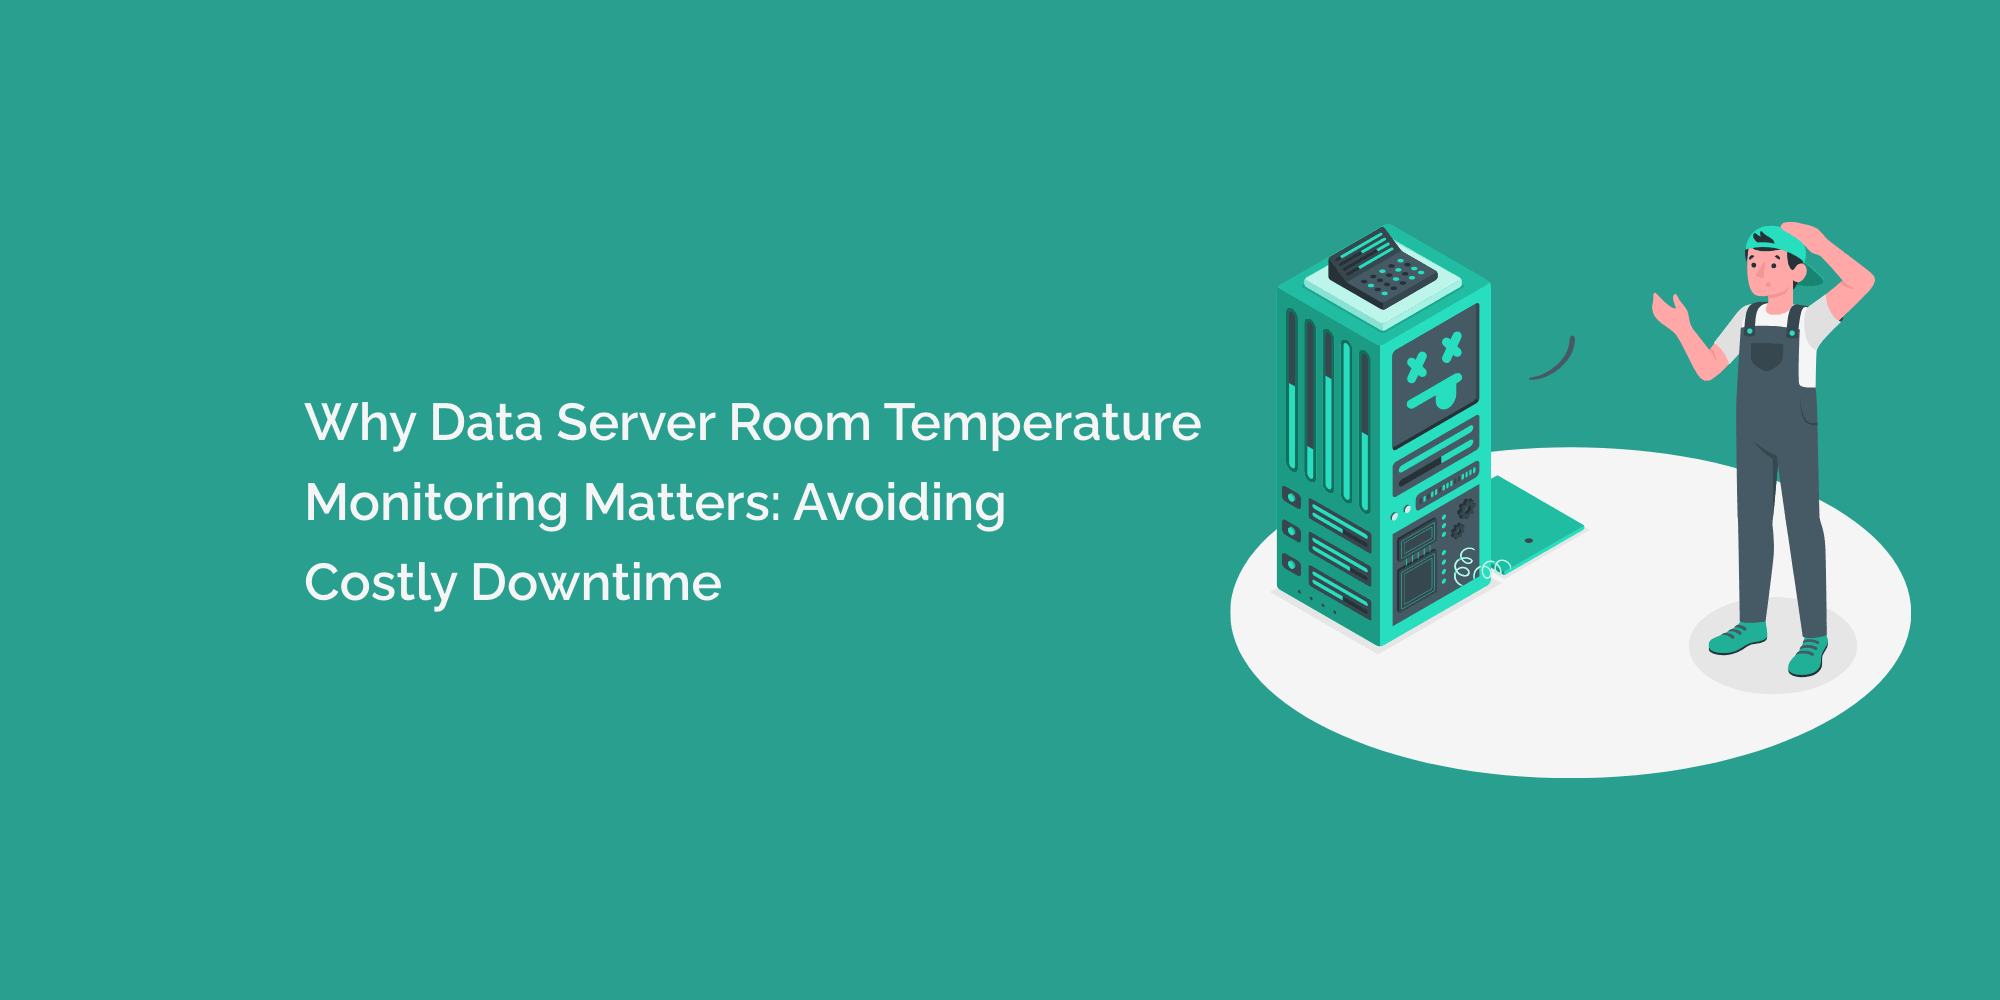 Why Data Server Room Temperature Monitoring Matters: Avoiding Costly Downtime